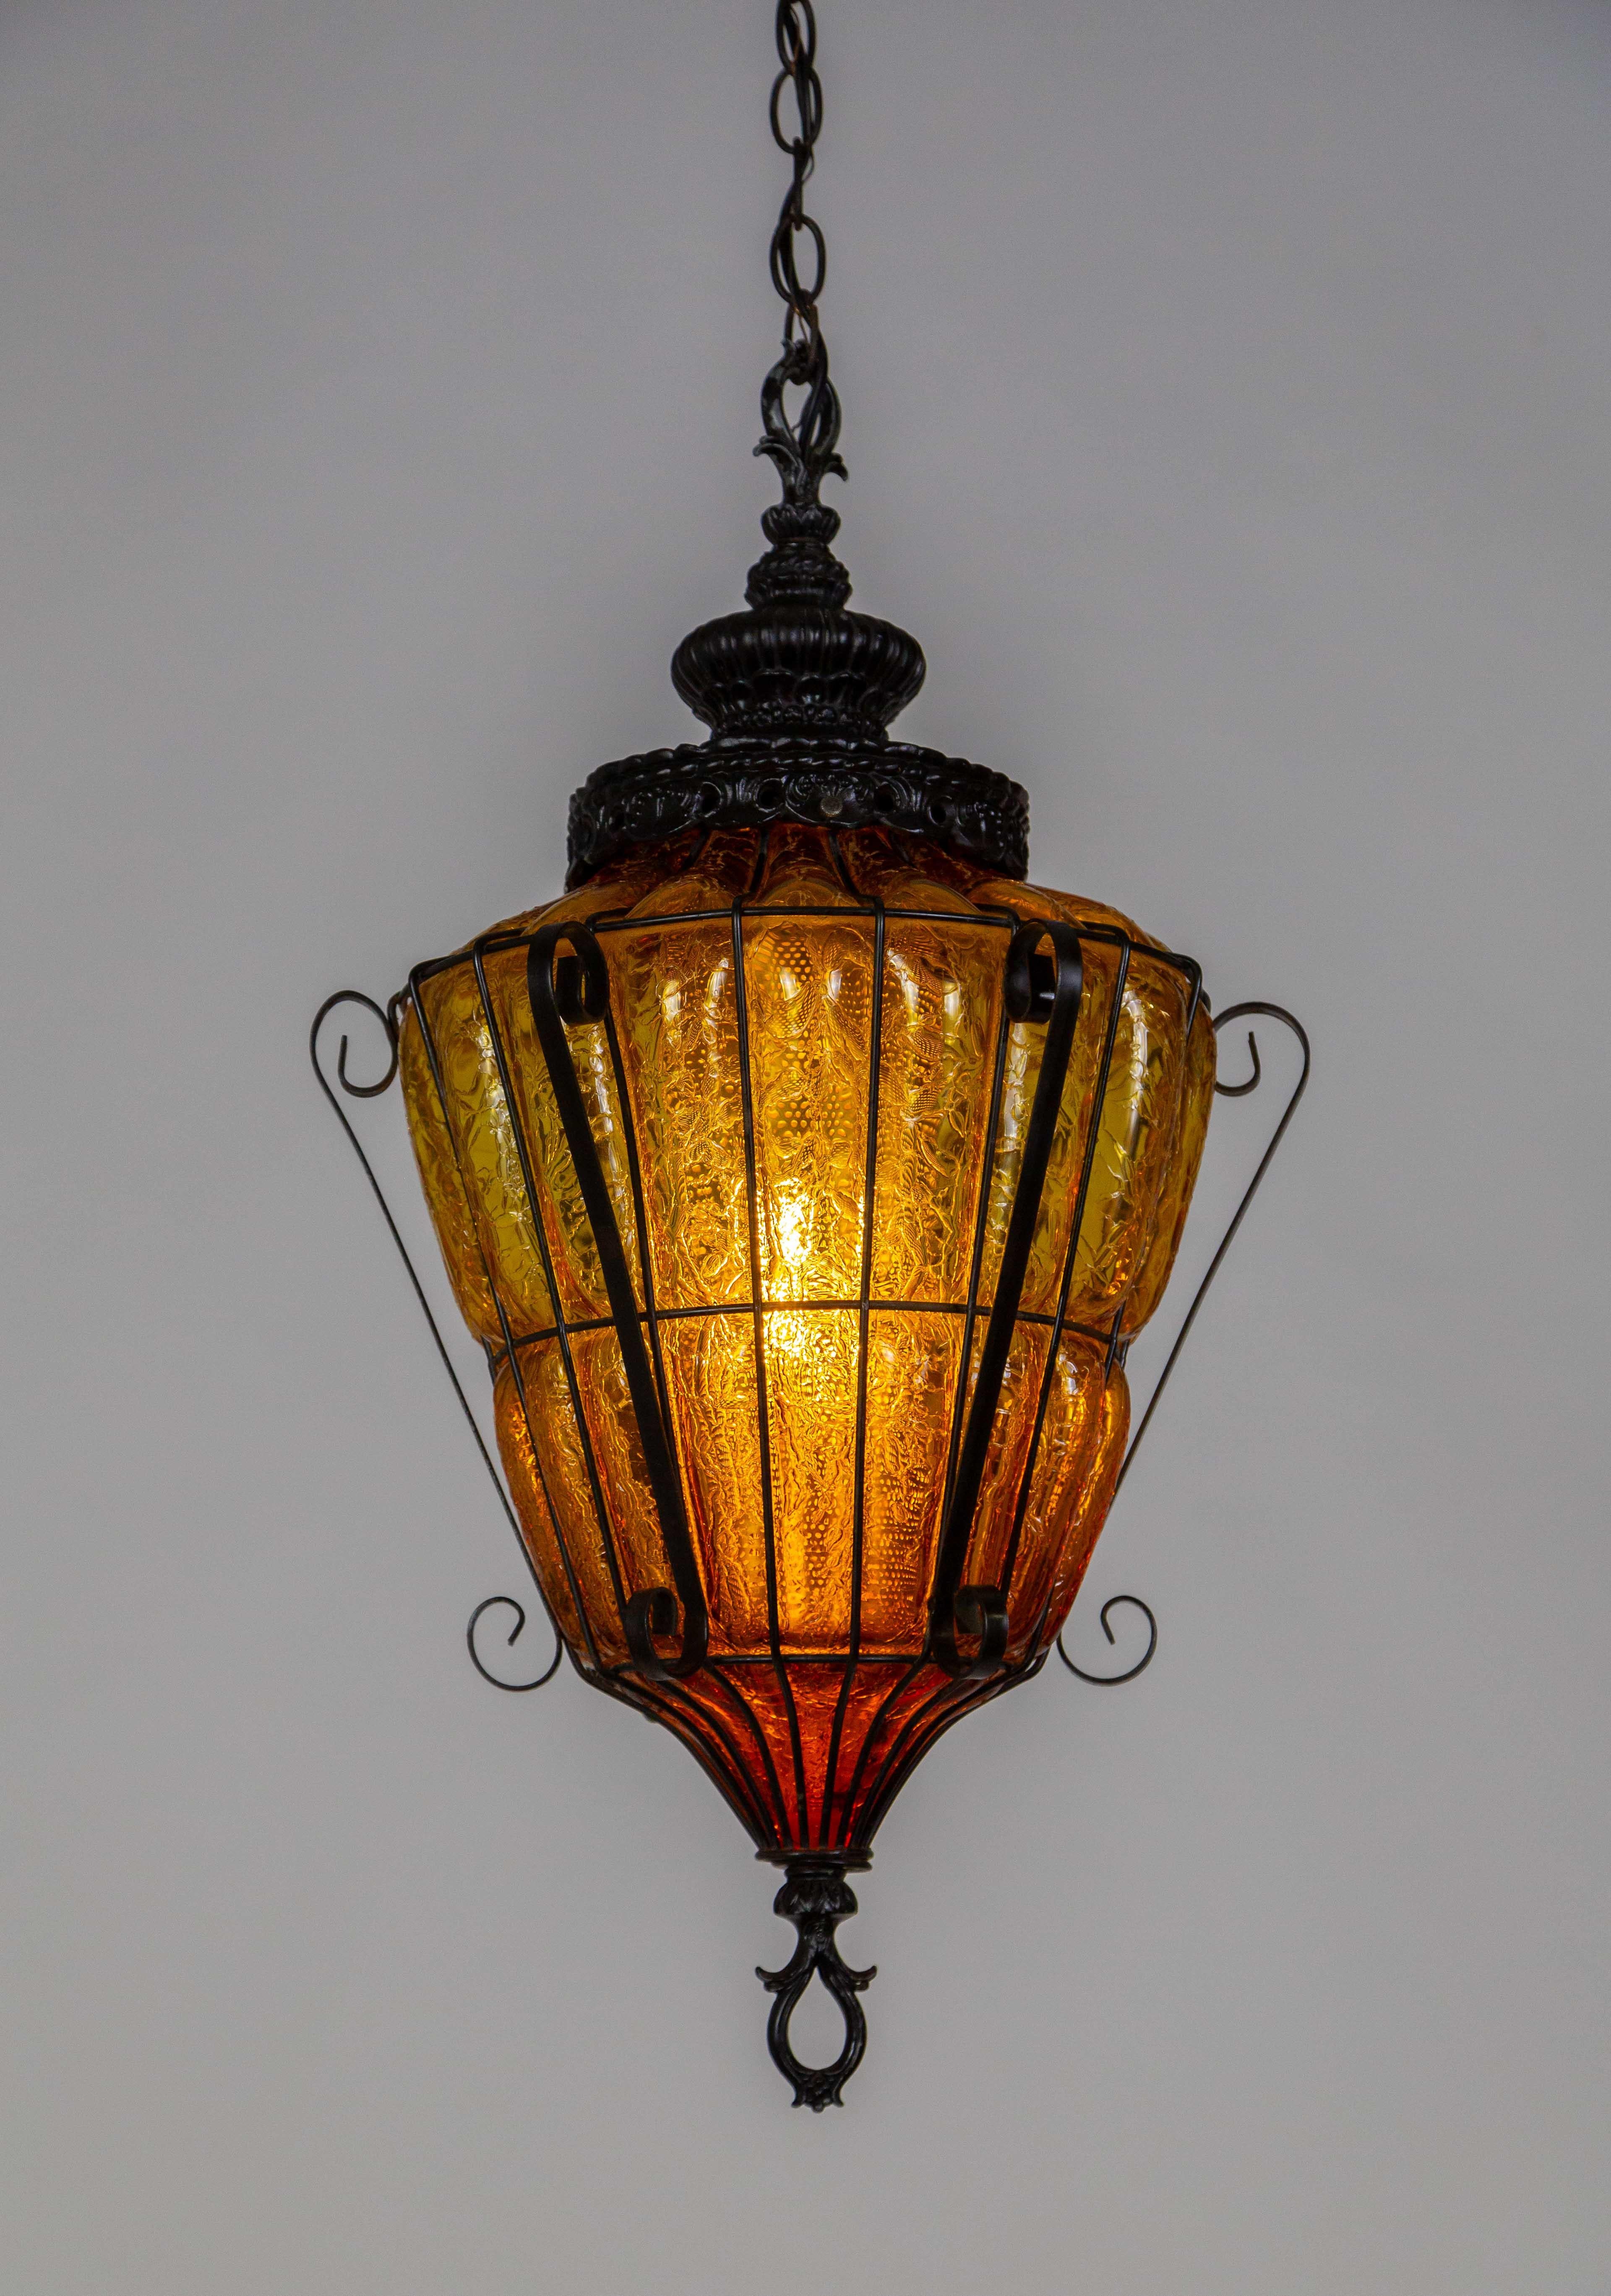 An amber, crackle, caged glass lantern pendant light from the mid 20th century; in an elegant shape with a decorative cap and s-curve accents. Newly rewired. 13